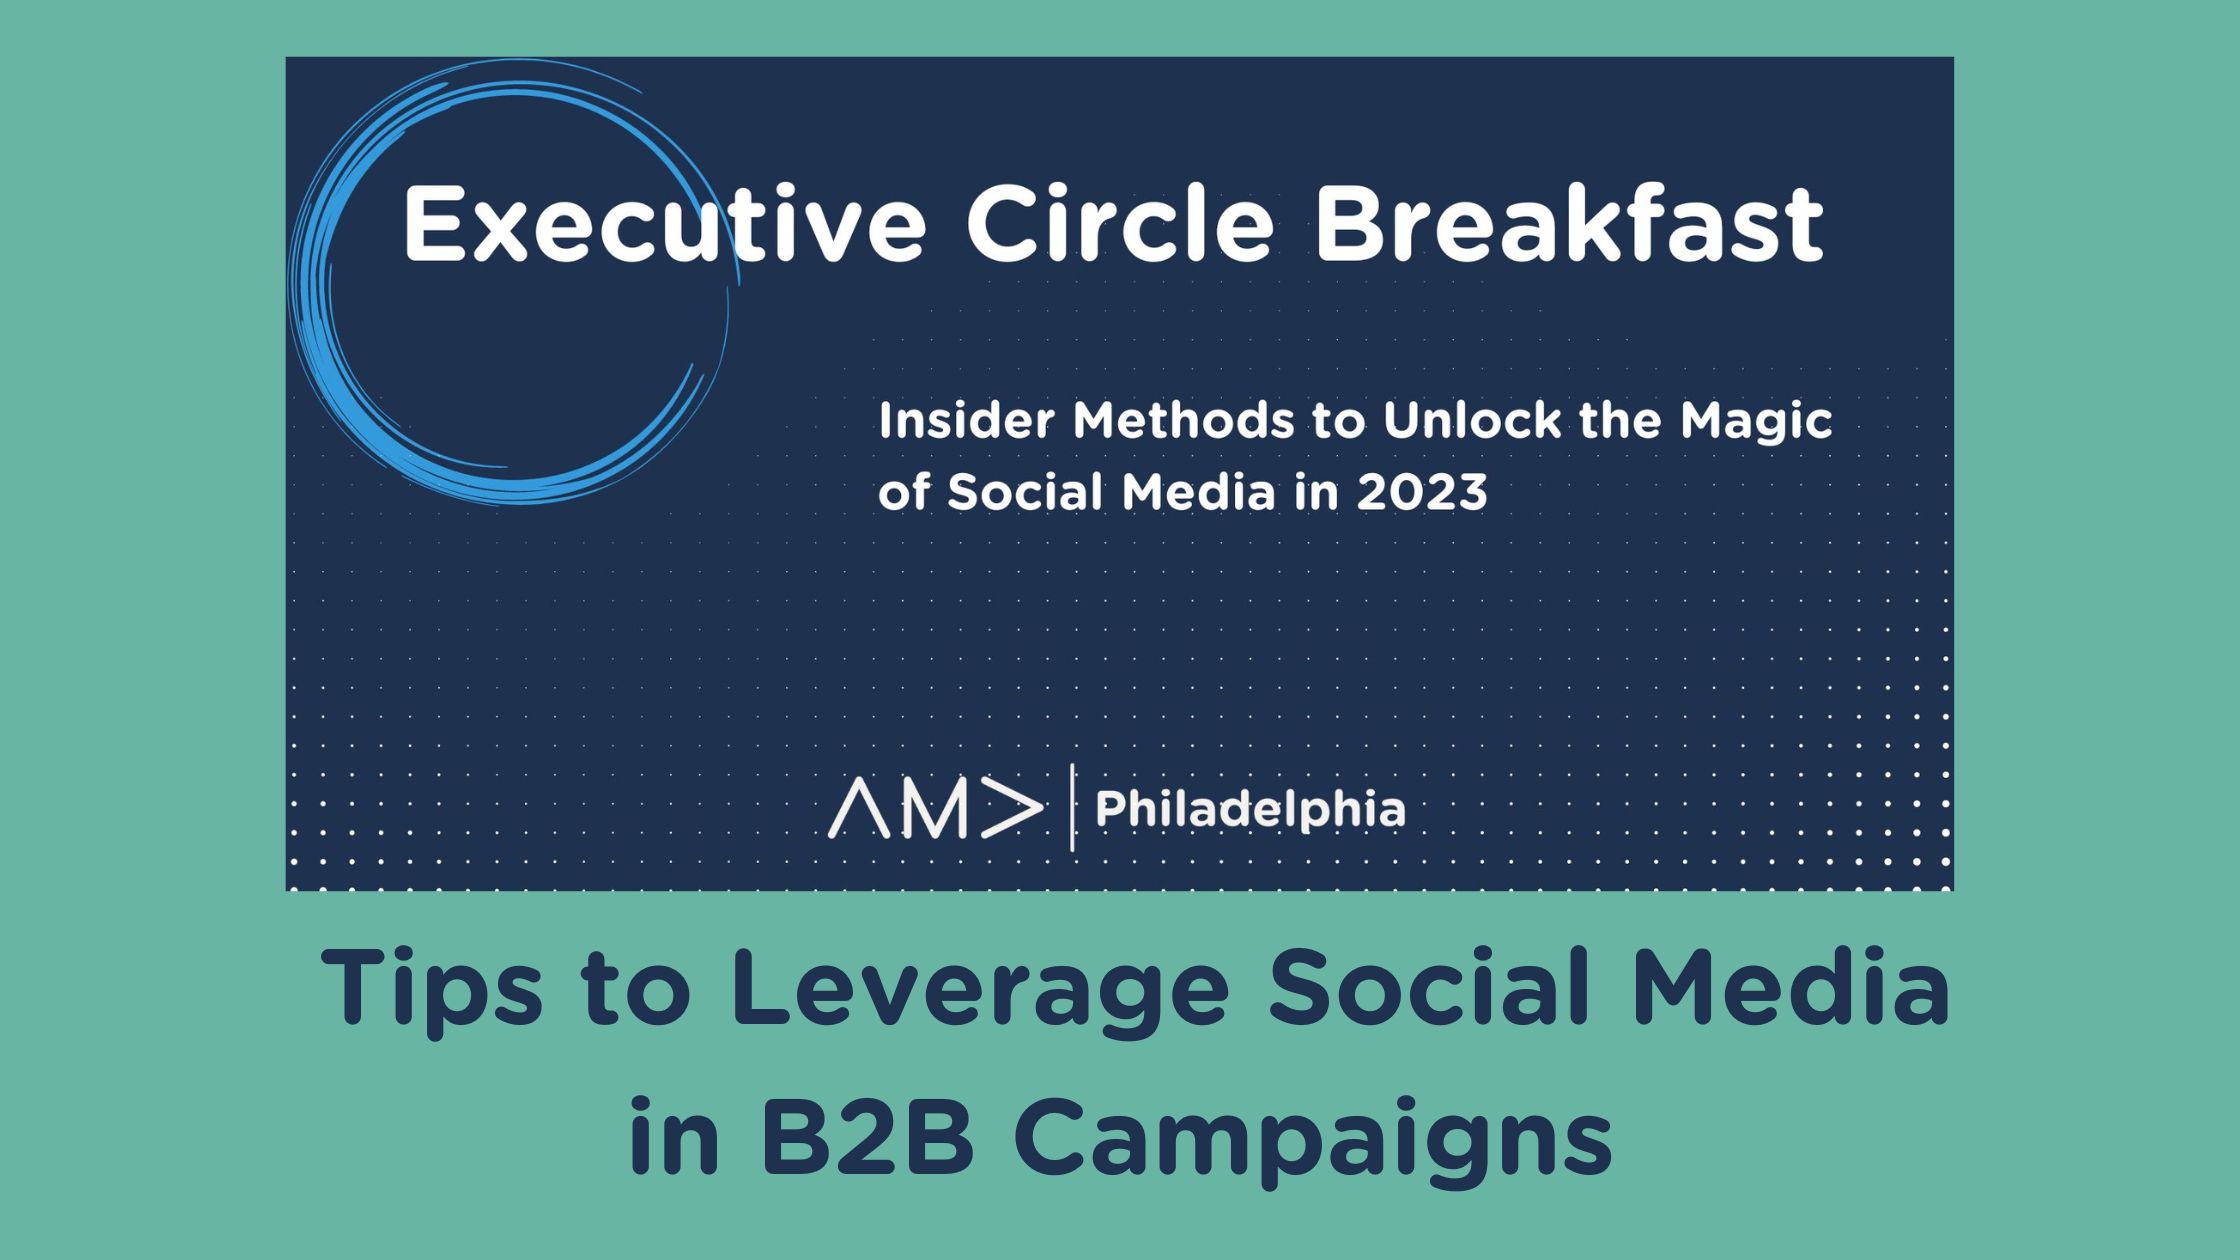 Tips to Leverage Social Media in B2B Campaigns: A Recap